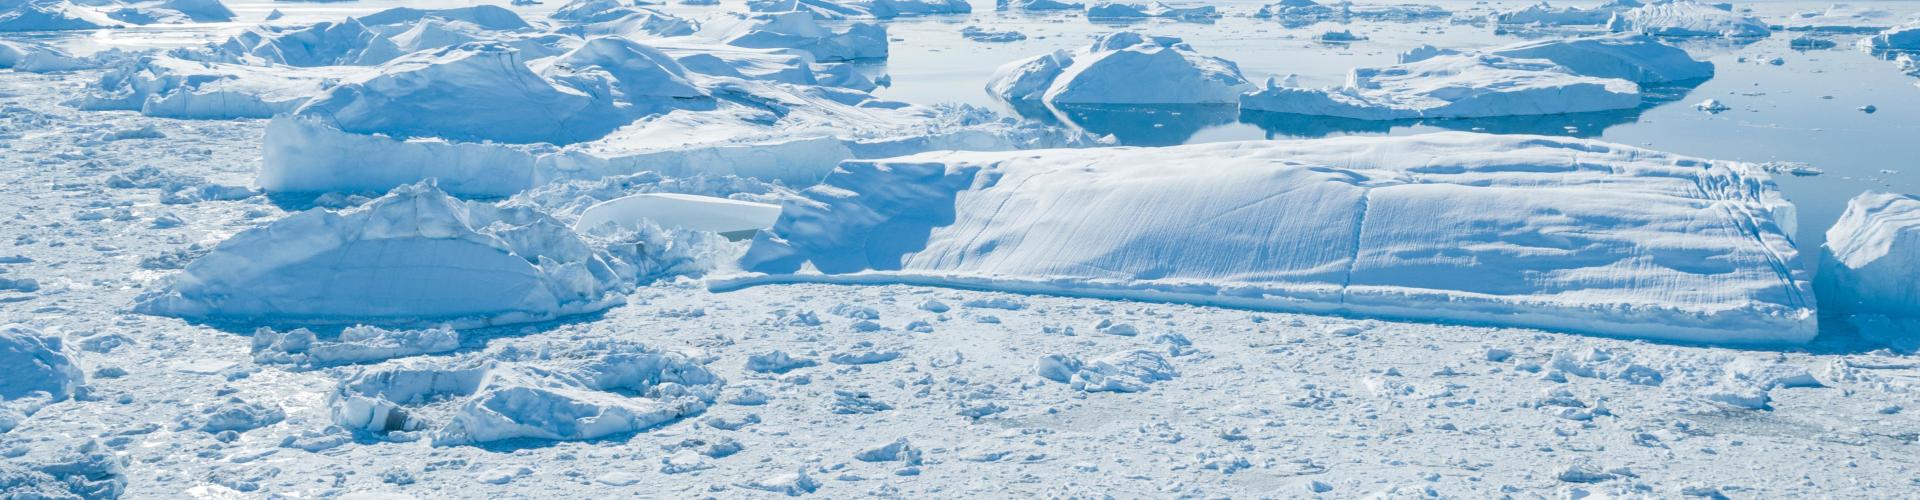 Ice sheet in Greenland continue to melt background